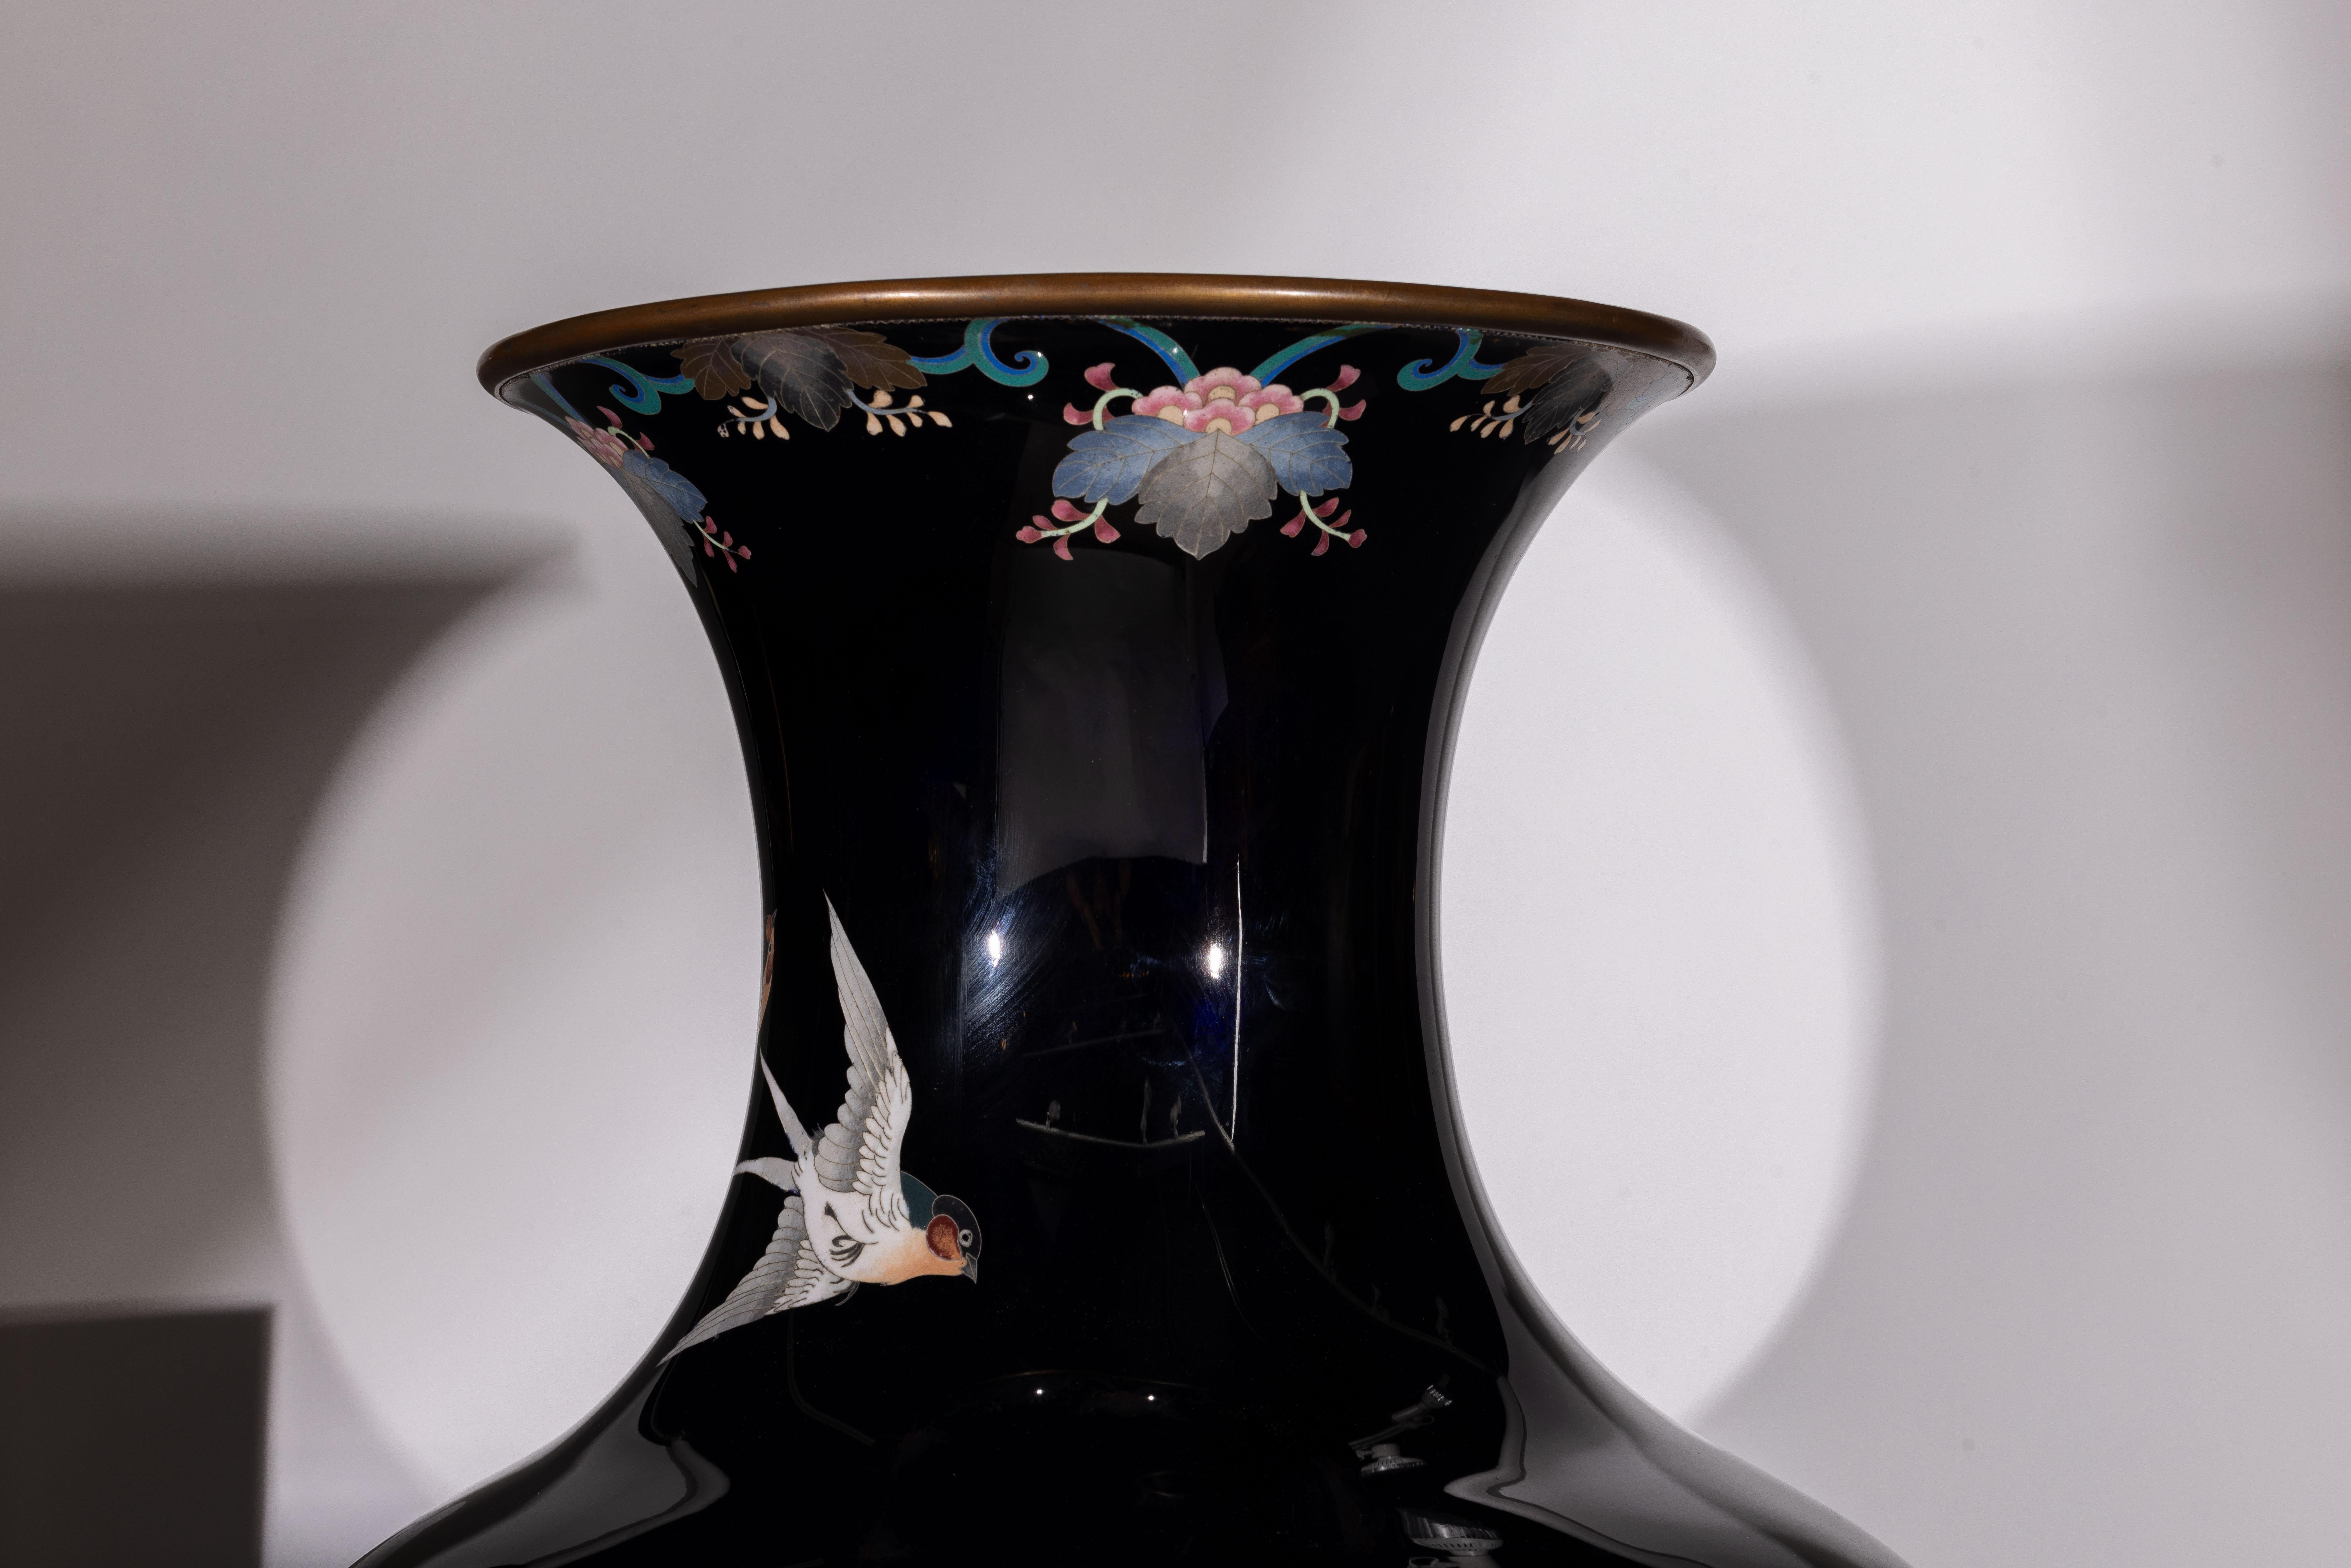 Palace-Sized Japanese Cloisonne Enamel Vase Adorned with Irises and Sparrows For Sale 7